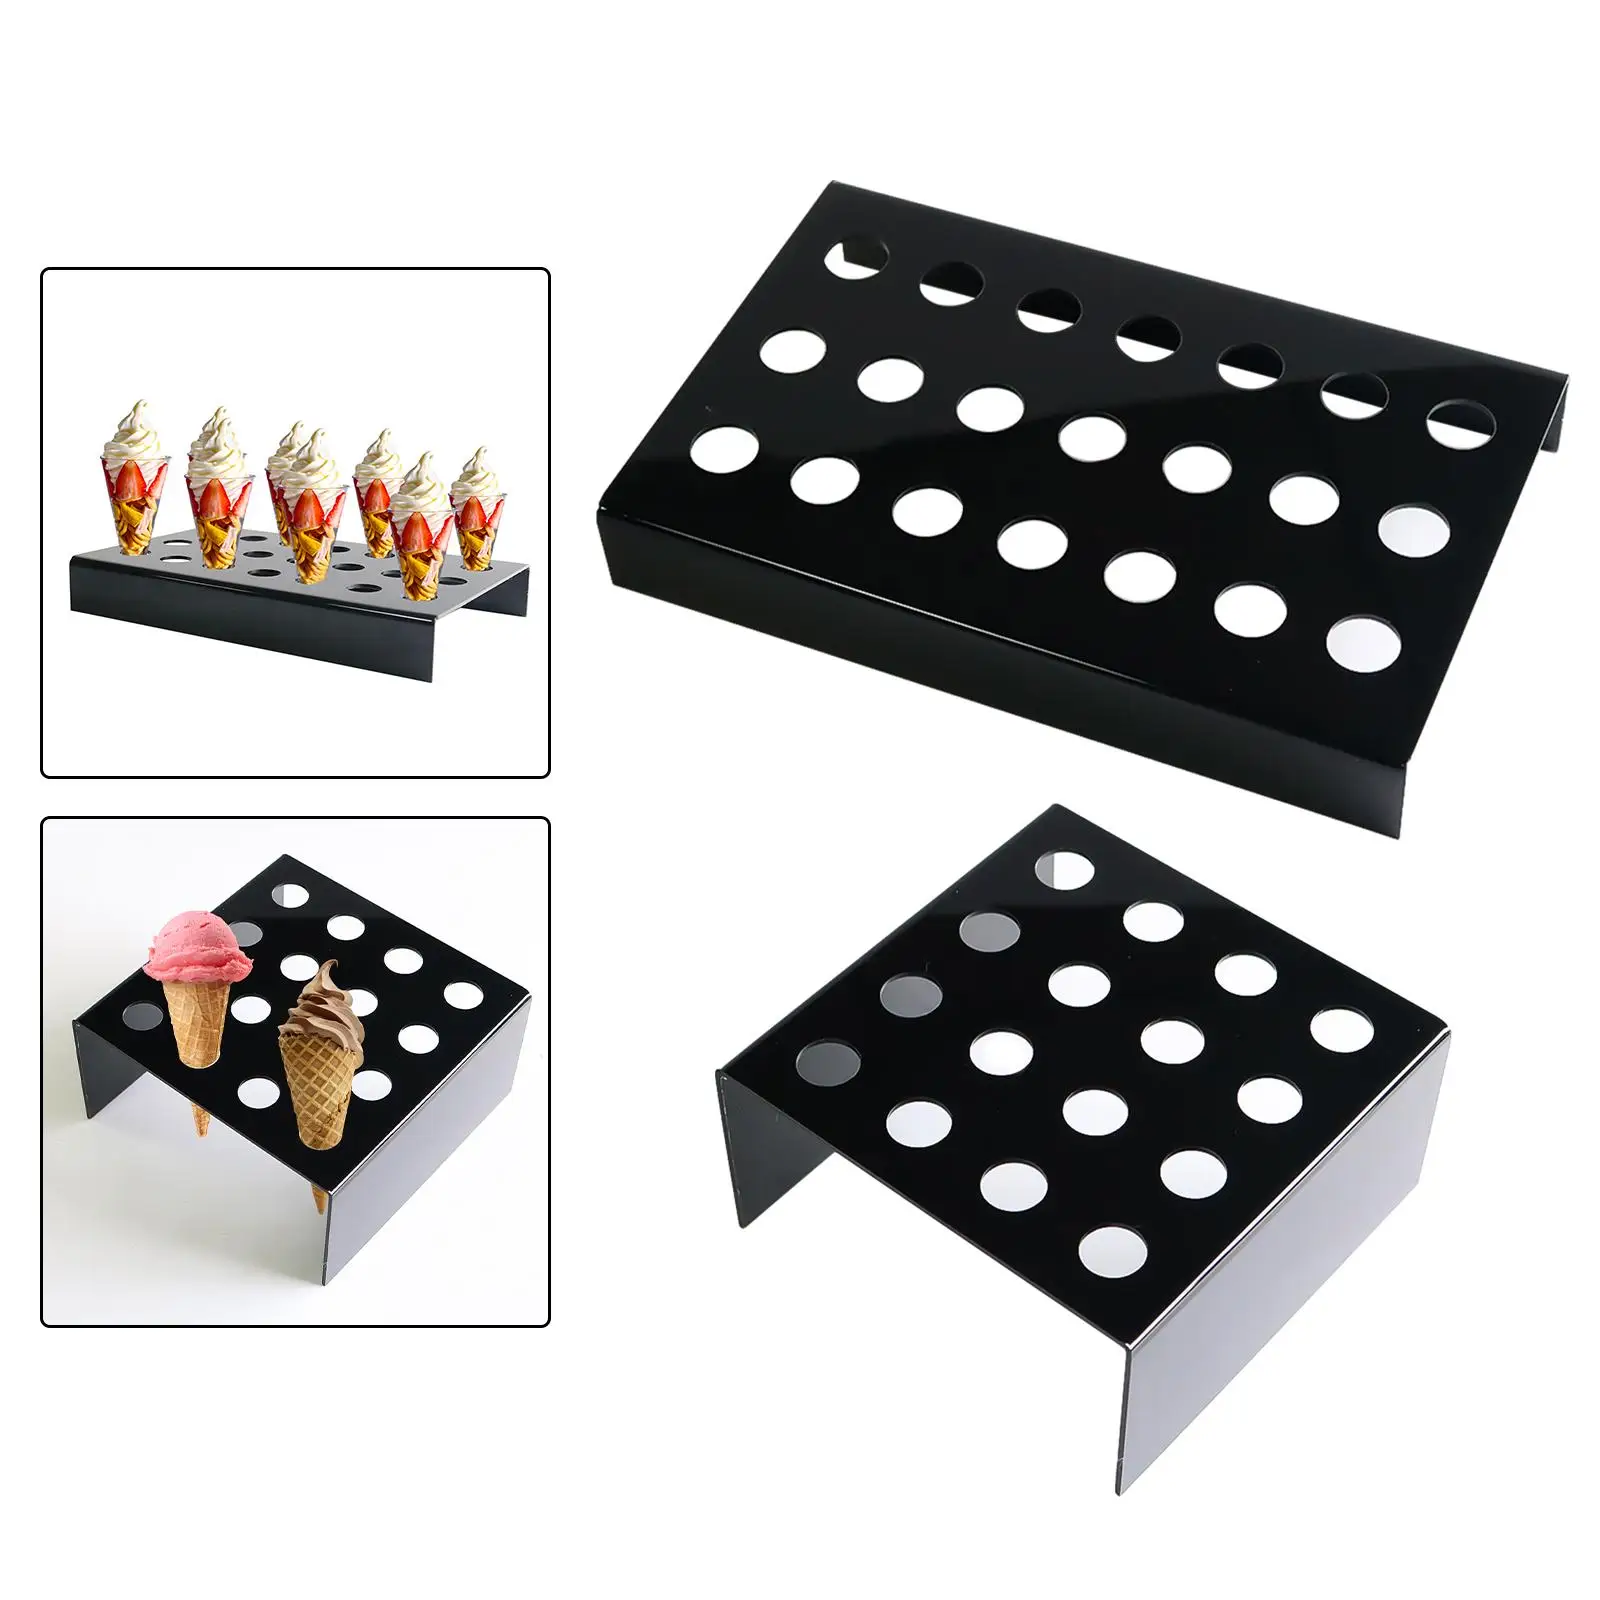 Ice Cream Cone Stand Cupcake Cones Baking Rack for Birthday Baking Cooking